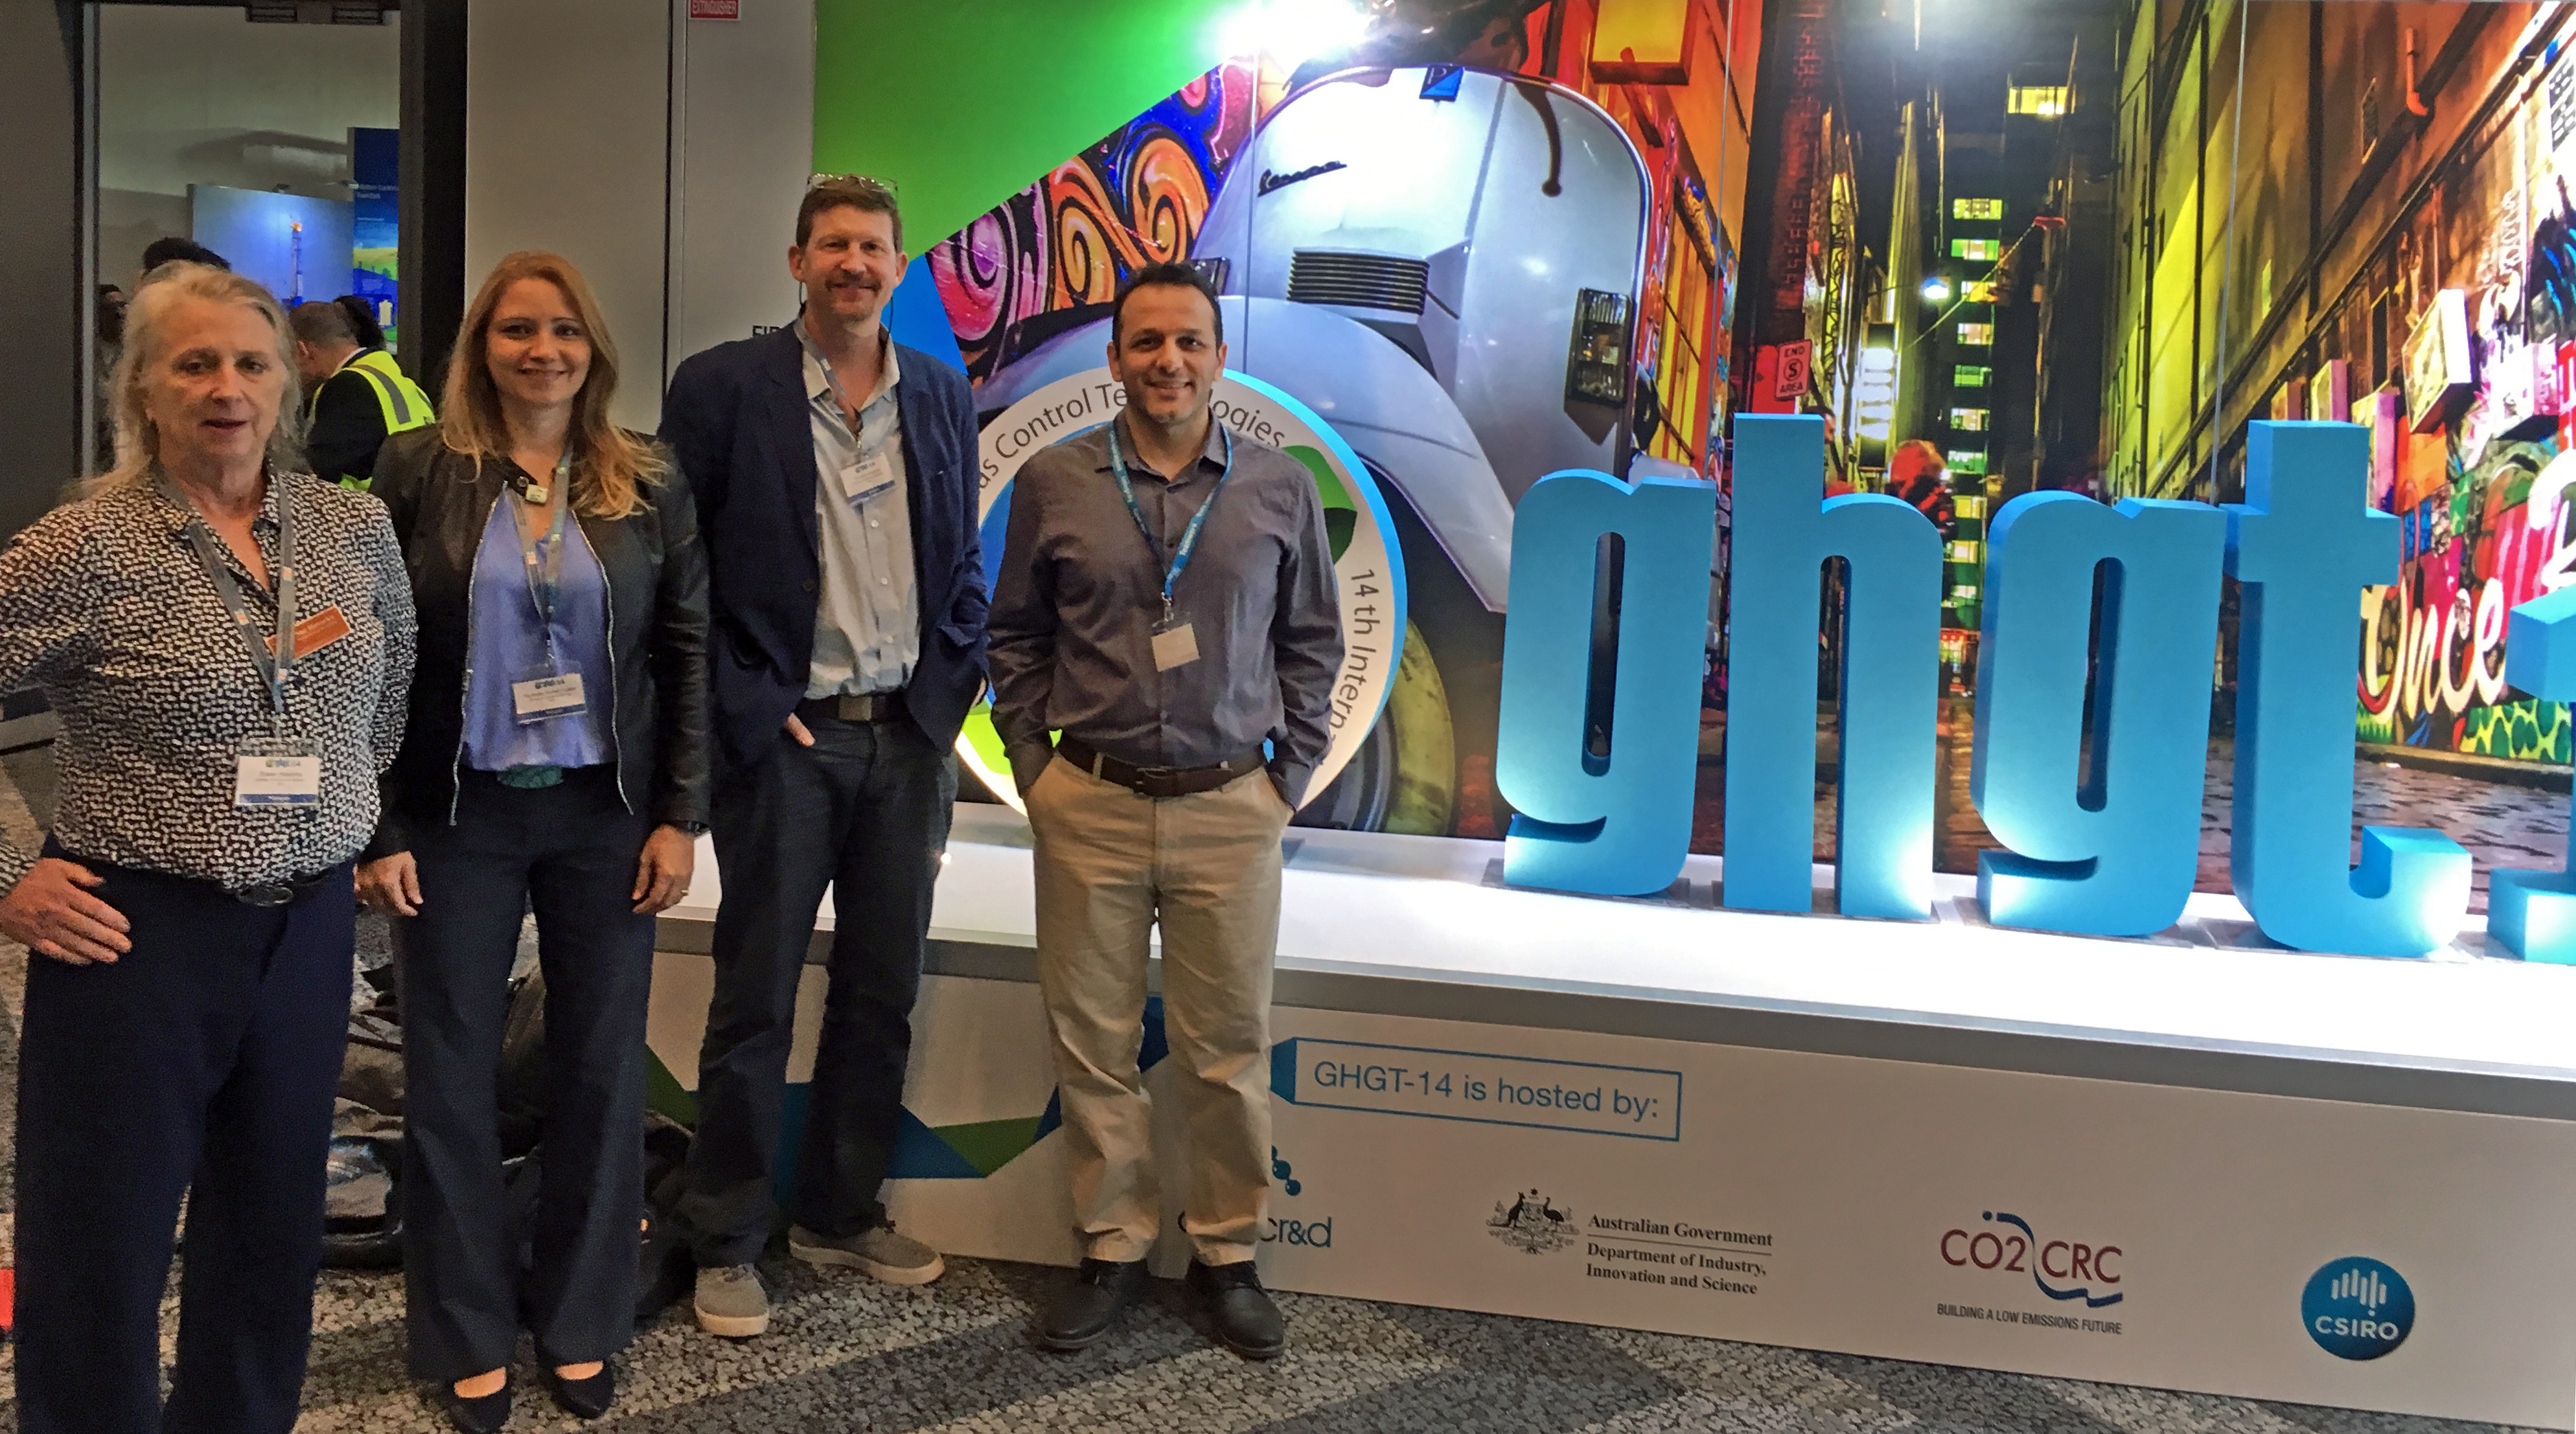 GCCC researchers stand in front of the ghgt-14 conference sign